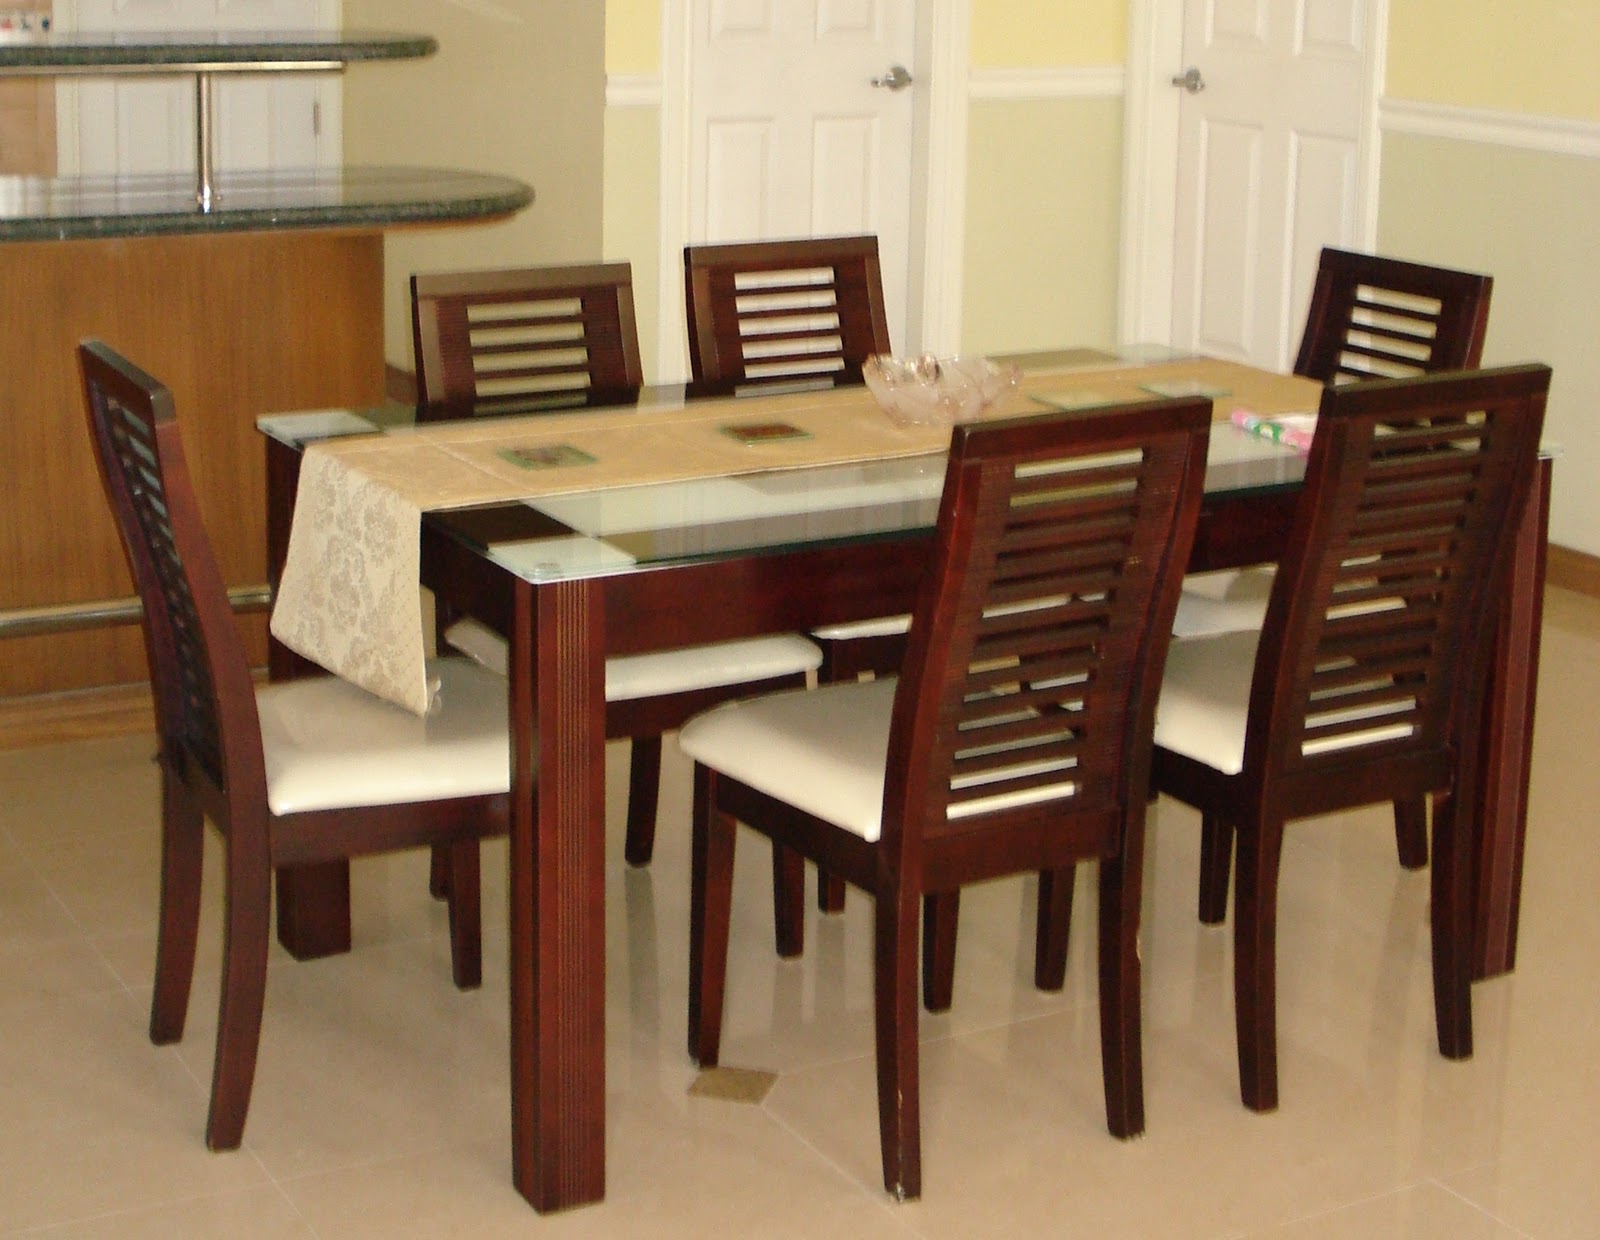 Minimalist Dining Room Furniture Philippines for Large Space